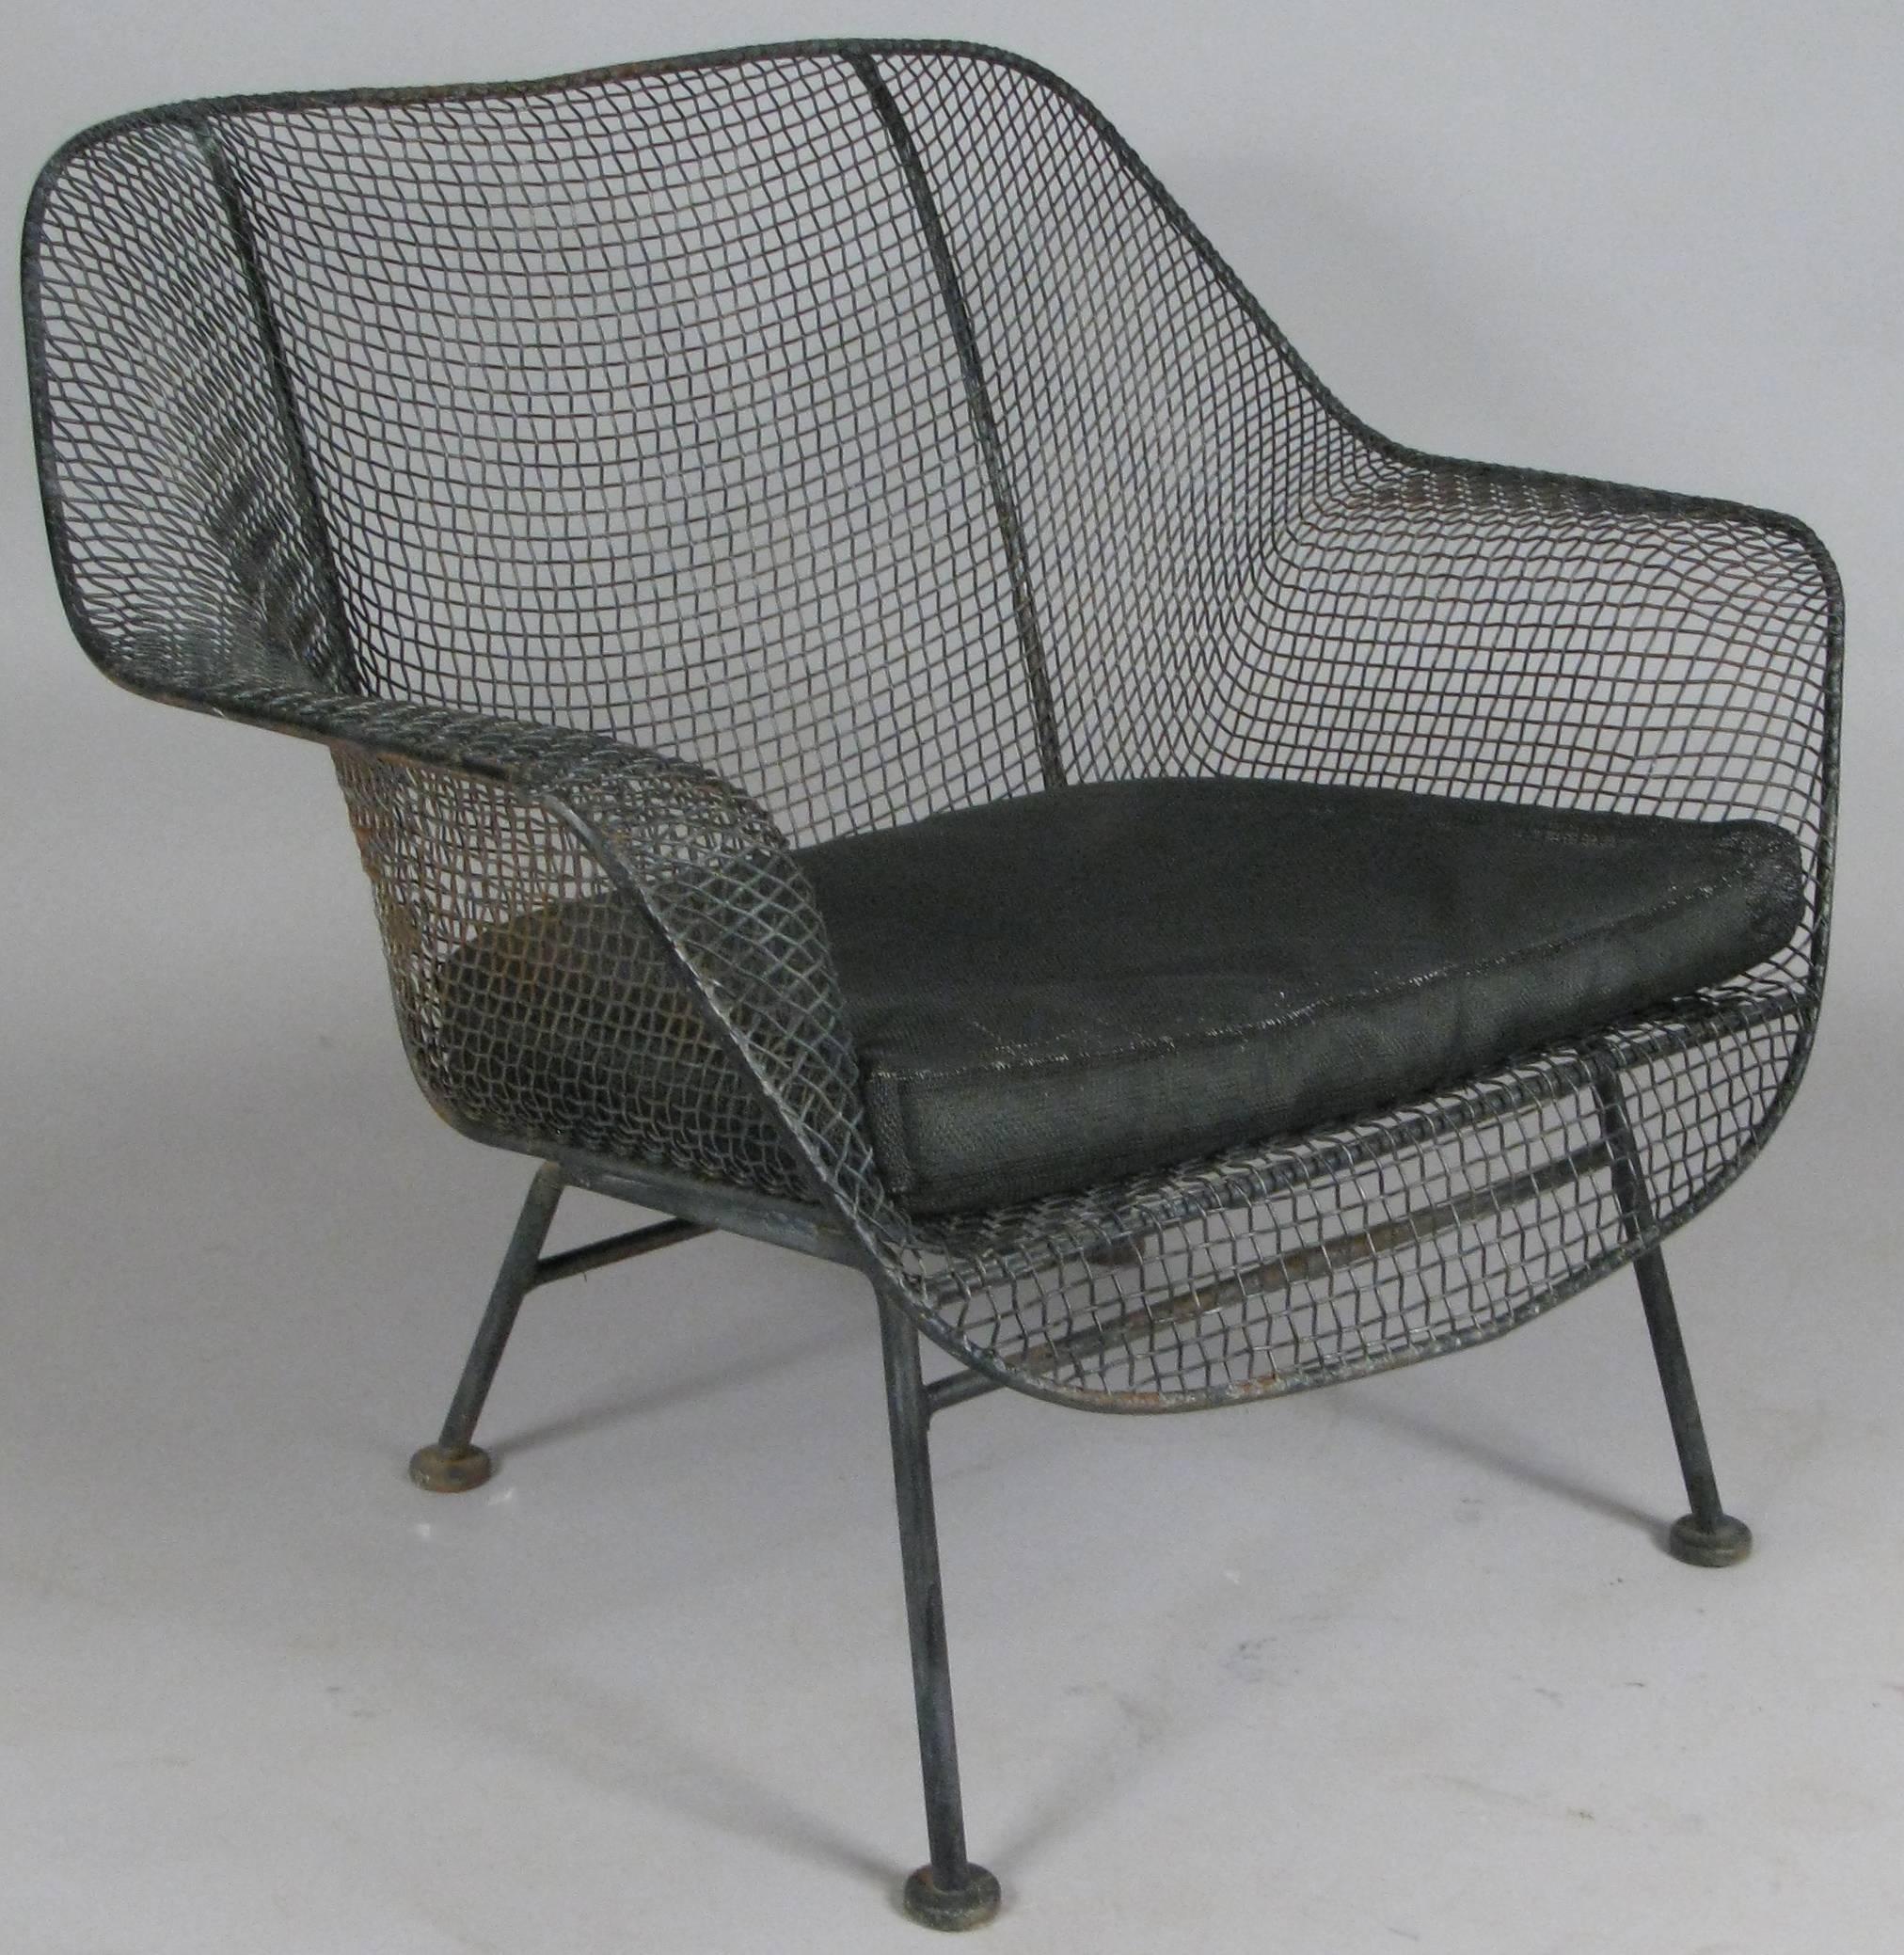 A pair of 1950s 'Sculptura' lounge chairs designed by Russell Woodard. Woodard's Sculptura collection was made with wrought iron frames and woven steel mesh seats. These are the largest lounge chairs made by Woodard in the 1950s. Currently finished